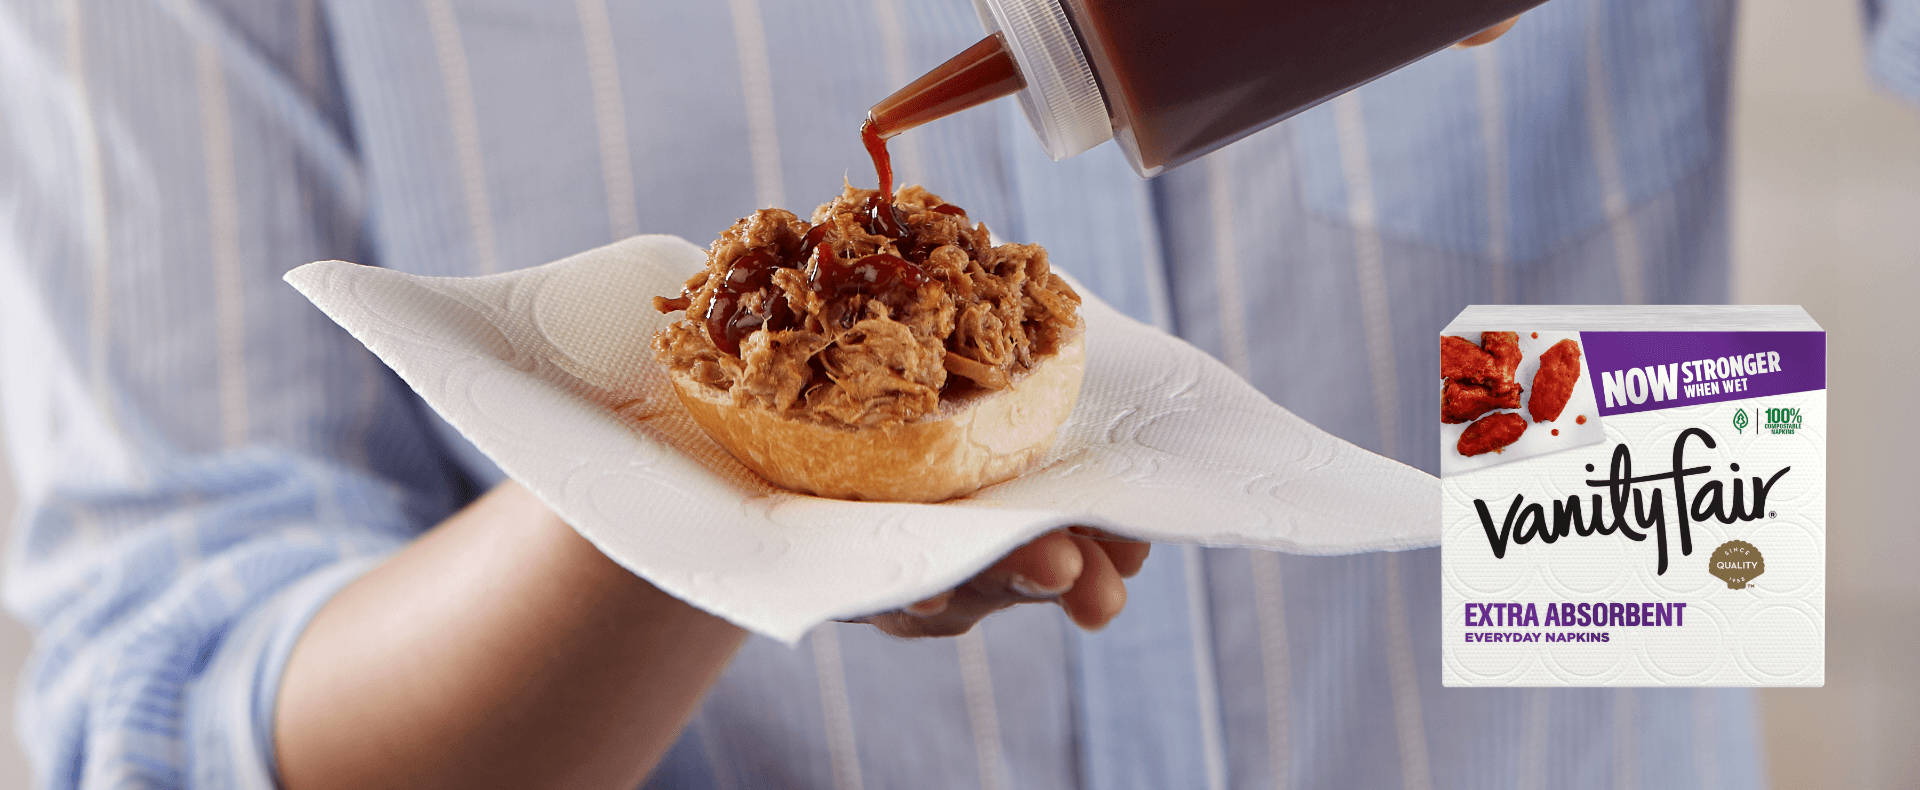 Person using a Vanity Fair Napkin to hold a barbecue pork sandwich.